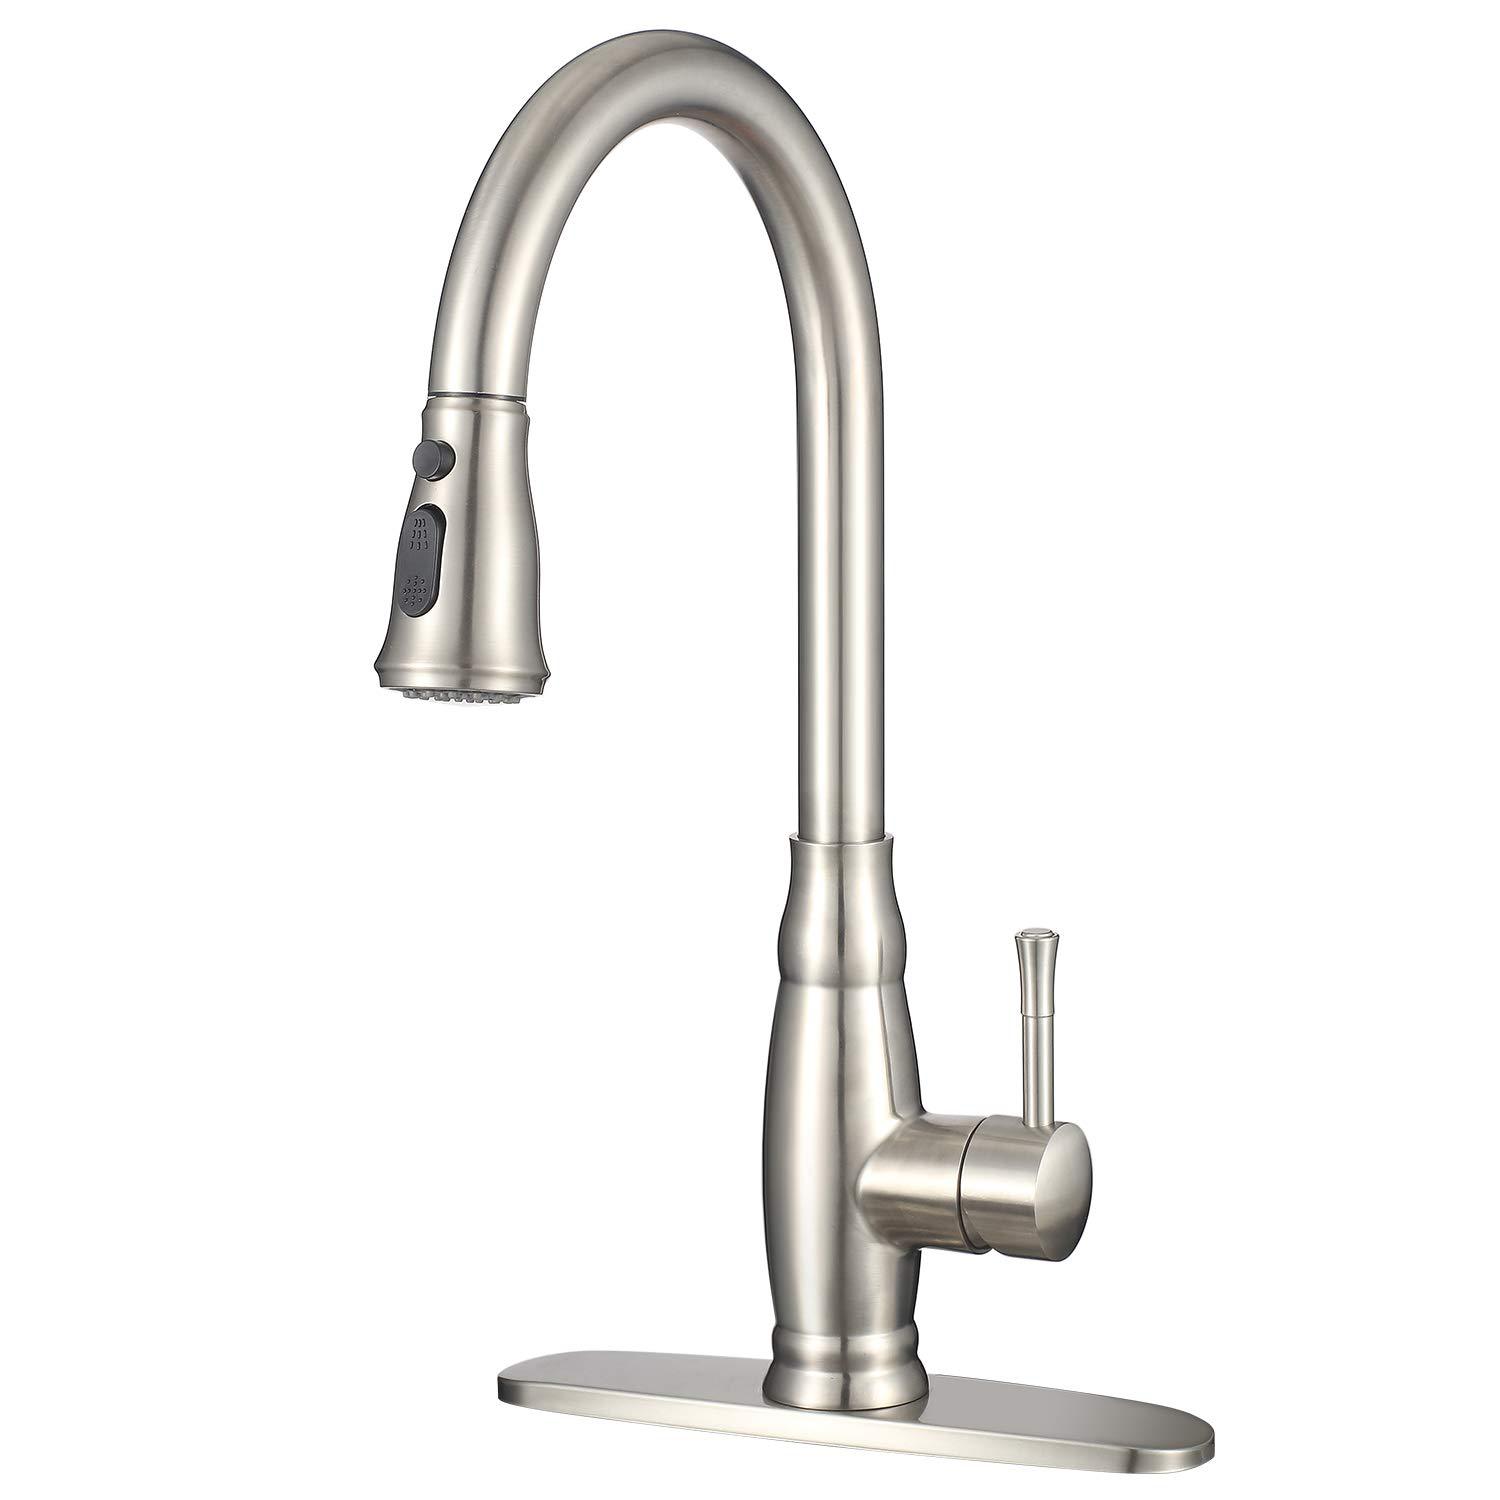 Bar Sink Faucet,Modern Style Stainless Steel 2 Water Function Setting